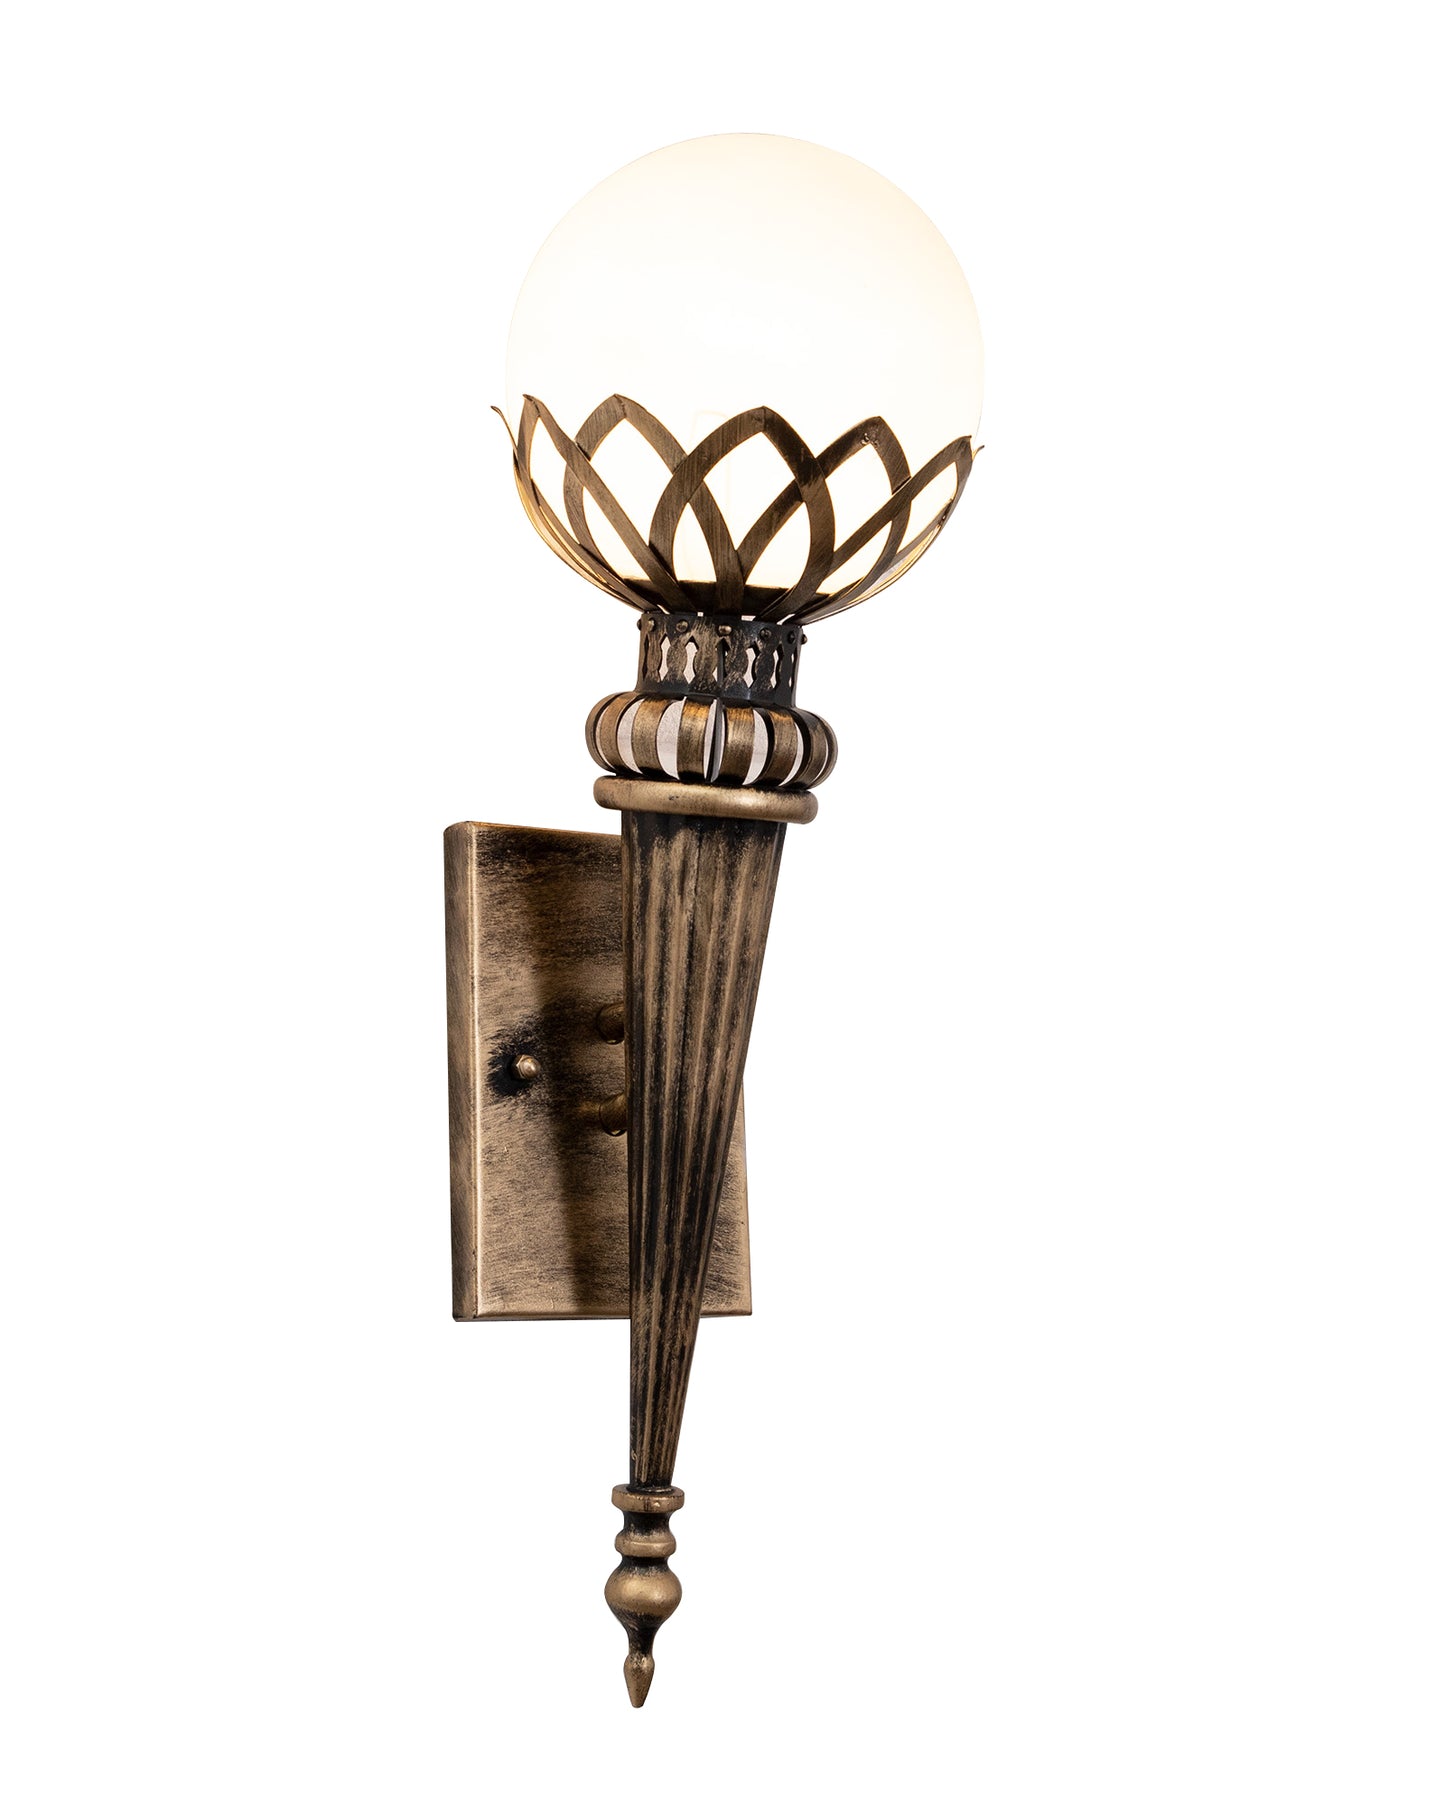 Filigree Wall Torch Rustic Wall Light Fixtures, Oil Rubbed Bronze Finish Indoor Vintage Wall Sconce Industrial Lamp Fixture Glass Shade Farmhouse Metal Sconces for Bedroom Living Room Cafe